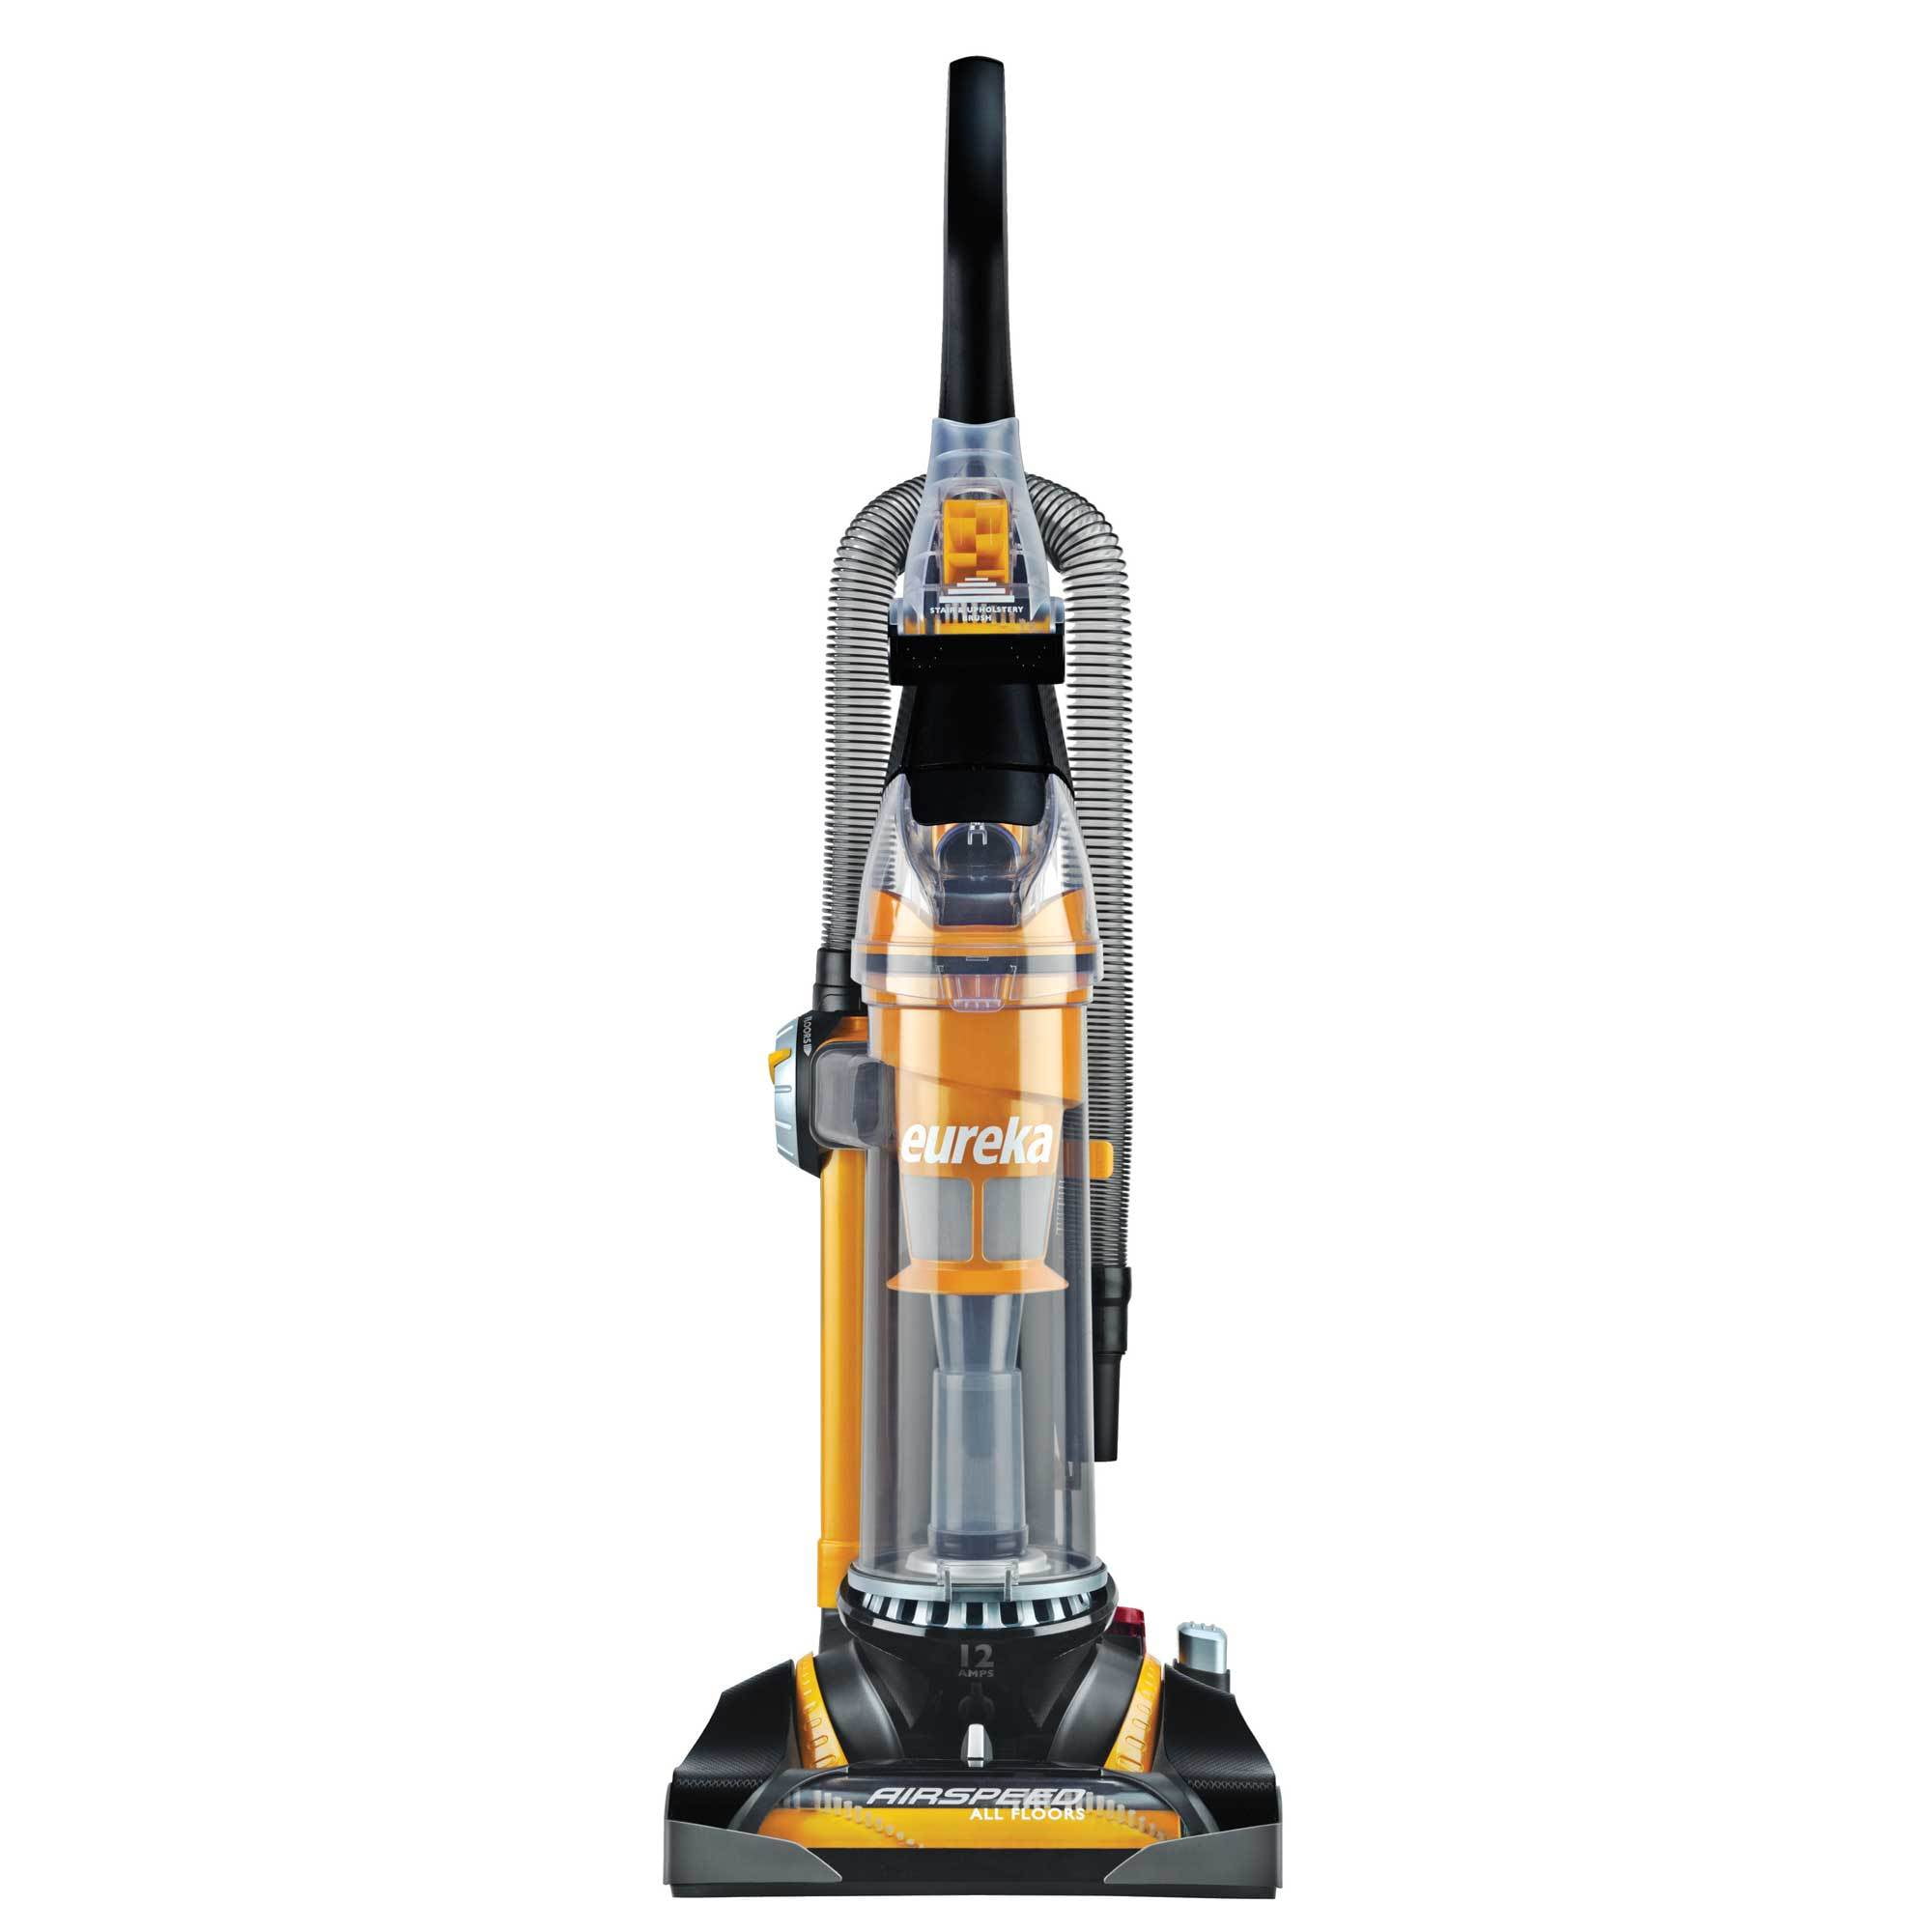 Standard Blue Eureka R300 Readyforce Bagless Cylinder Powerful Compact Lightweight Corded Vacuum Cleaner for Multi-Floors and Carpets